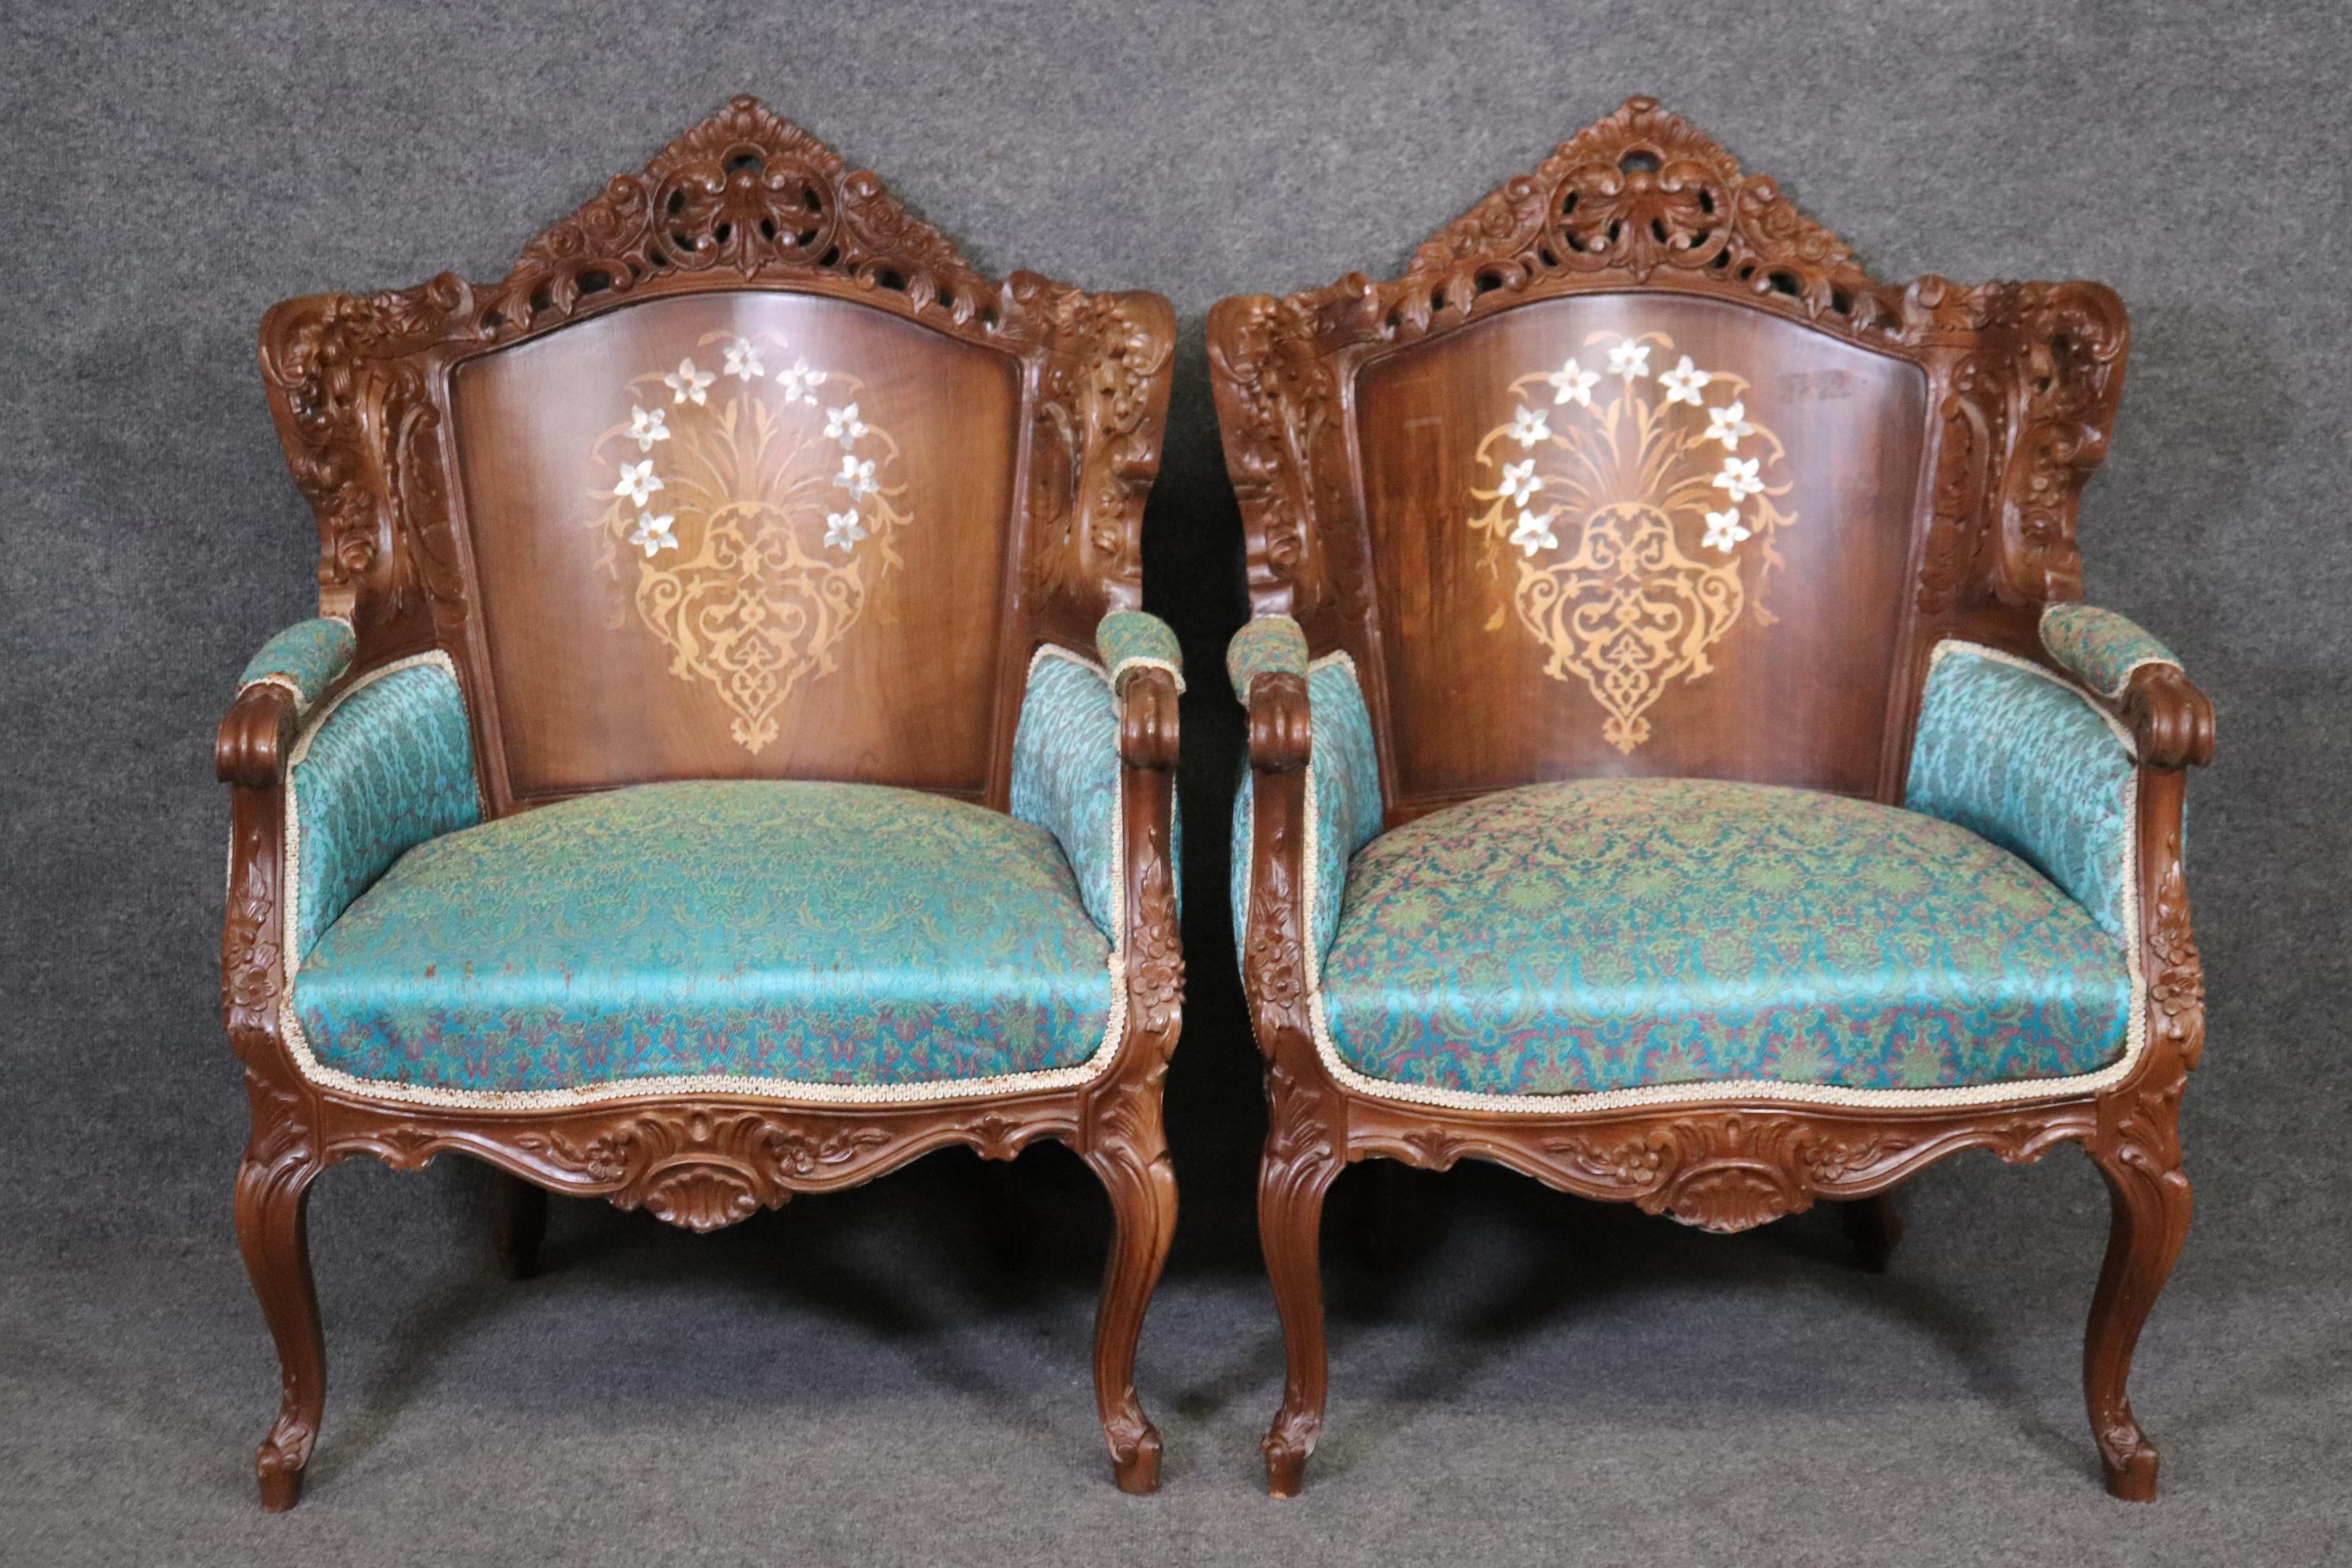 Dimensions- H: 39 1/4in W: 27 3/4in D: 28in SH: 18 1/2in 
This Pair of Carved Louis XV Style Armchairs Bergeres With Mother of Pearl Decoration are truly unique and a pretty pair of chairs that are perfect if you are looking to bring a nice sense